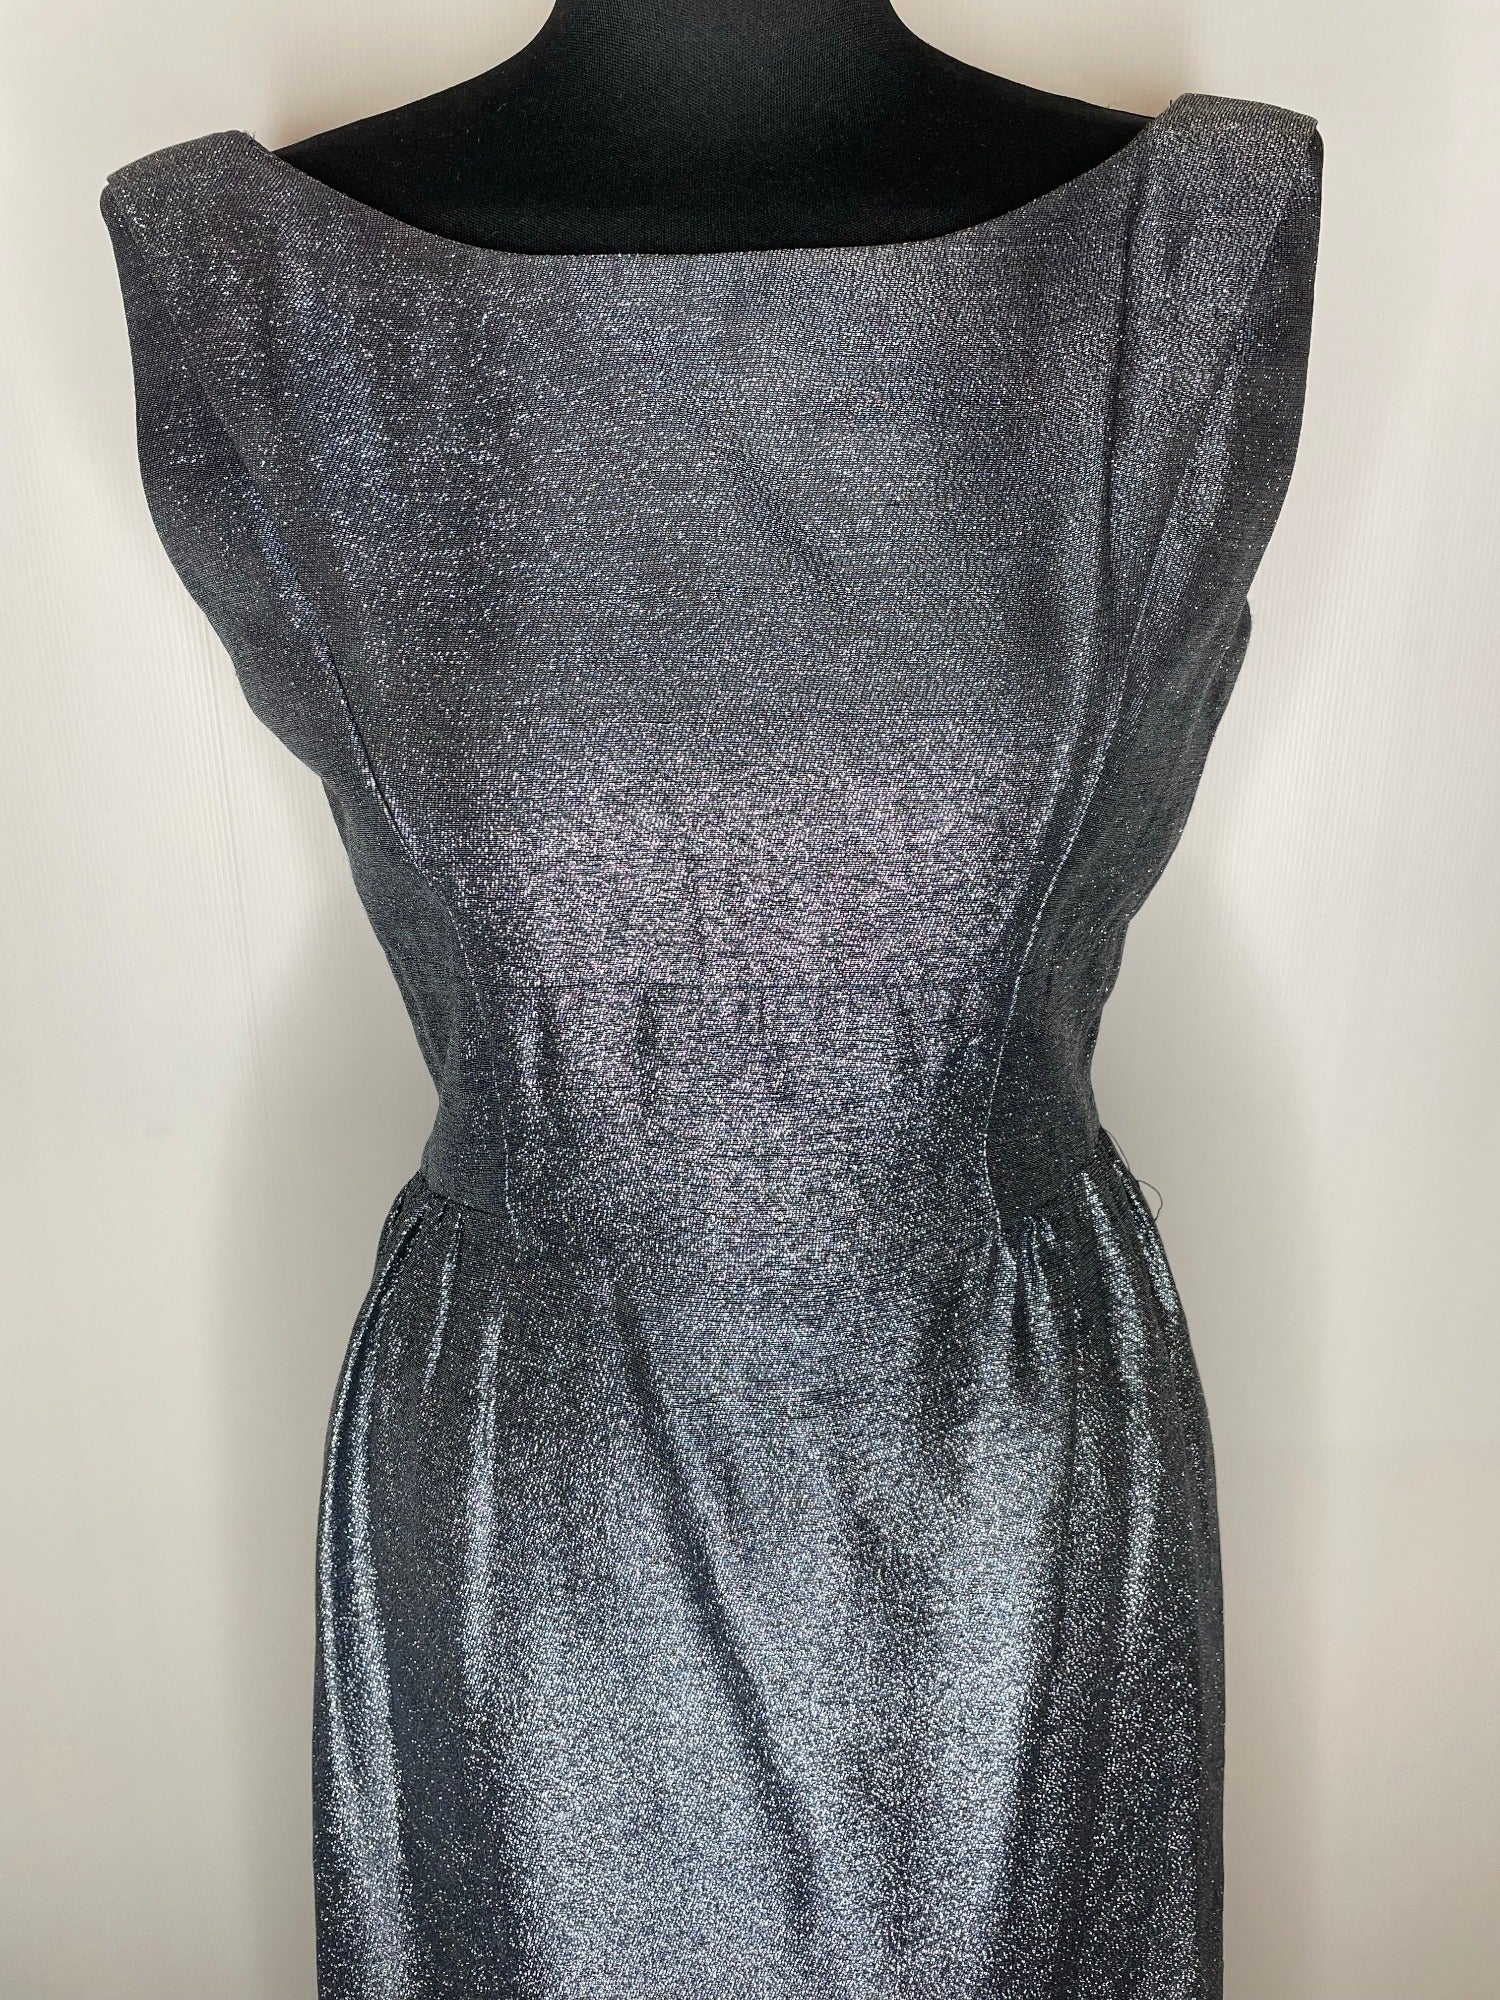 womens  wiggle dress  vintage  Urban Village Vintage  sparkly  silver  shift dress  shift  party  new year  lurex  grey  glitter  glam  festive  dress  crepe  christmas  bow  boat neck  60s  50s  1960s  1950s  10